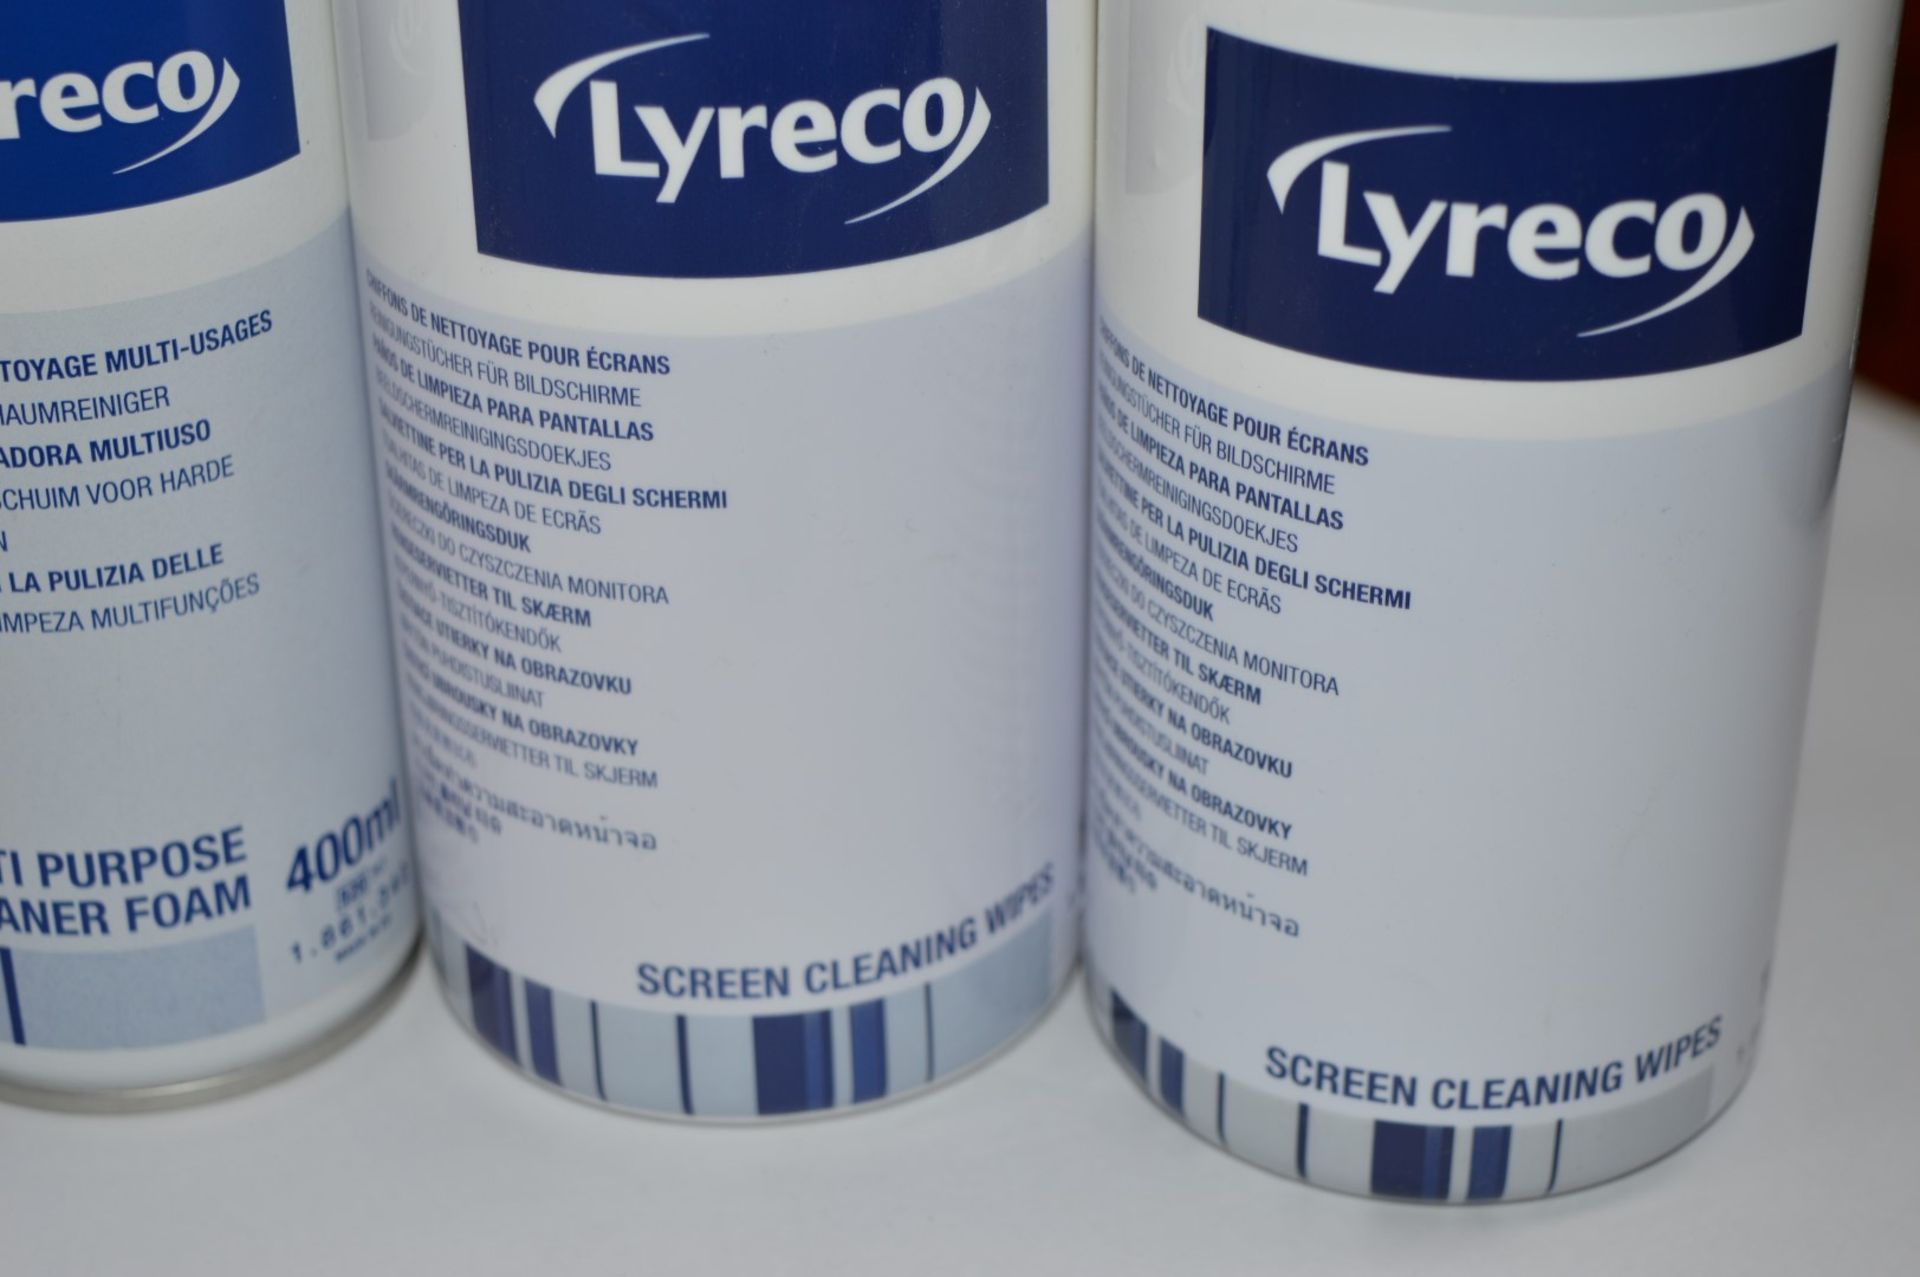 10 x Packs of Lyreco Multipurpose Foam Cleaner and Screen Cleaning Wipes - Unused Stock - CL400 - - Image 4 of 4